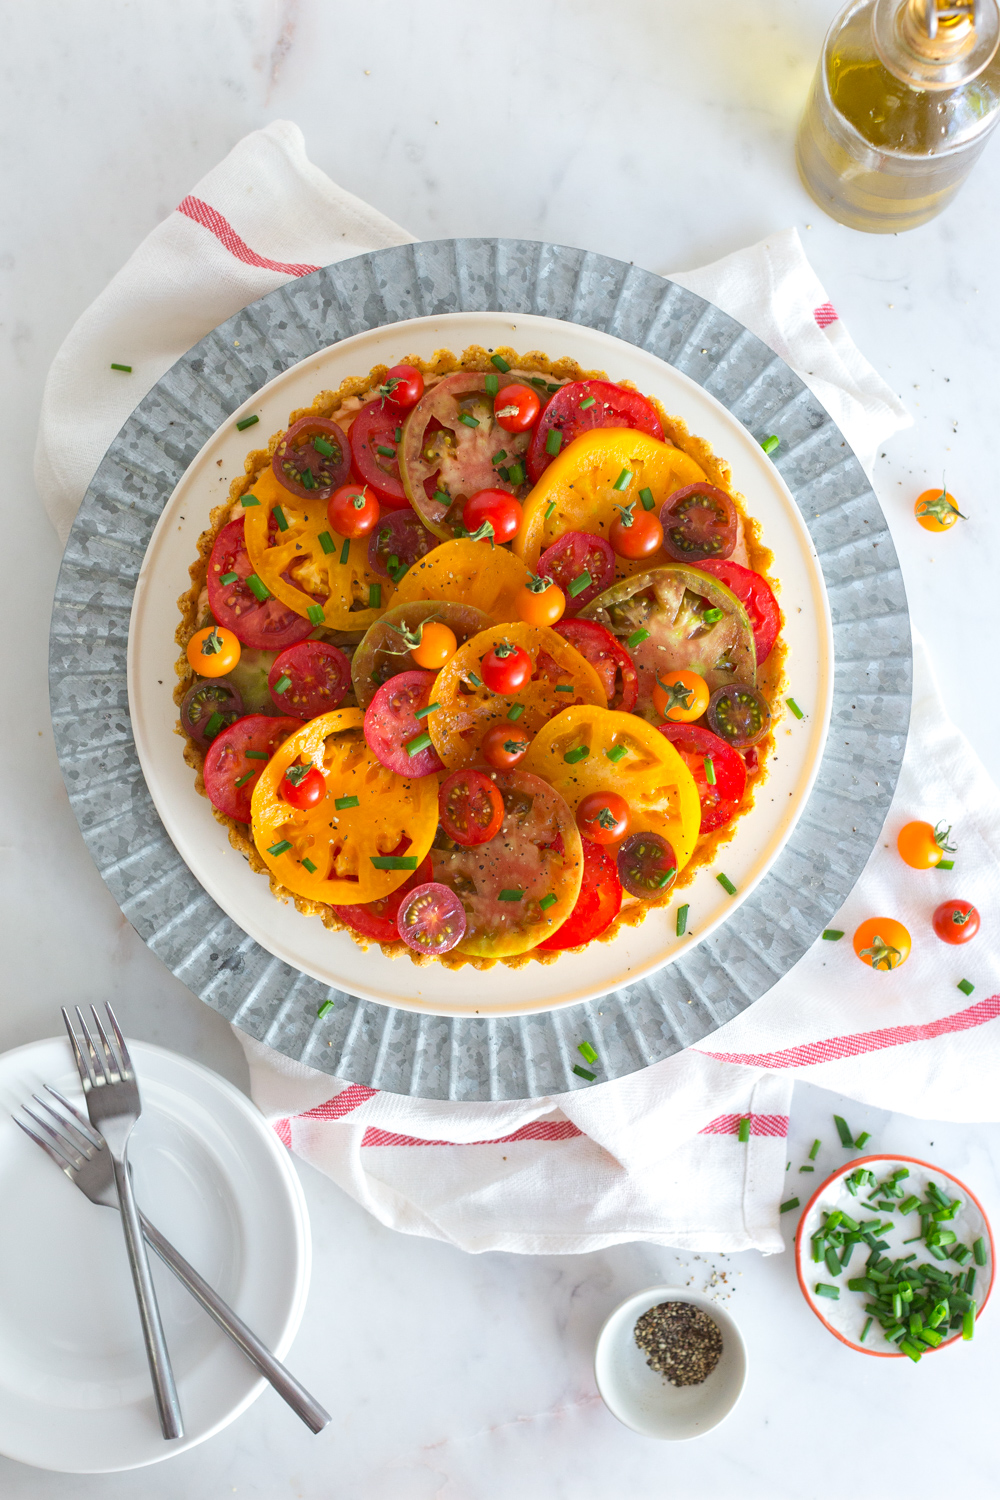 Heirloom Tomato and Pimento Cheese Tart with Cornmeal Crust from Baking The Goods